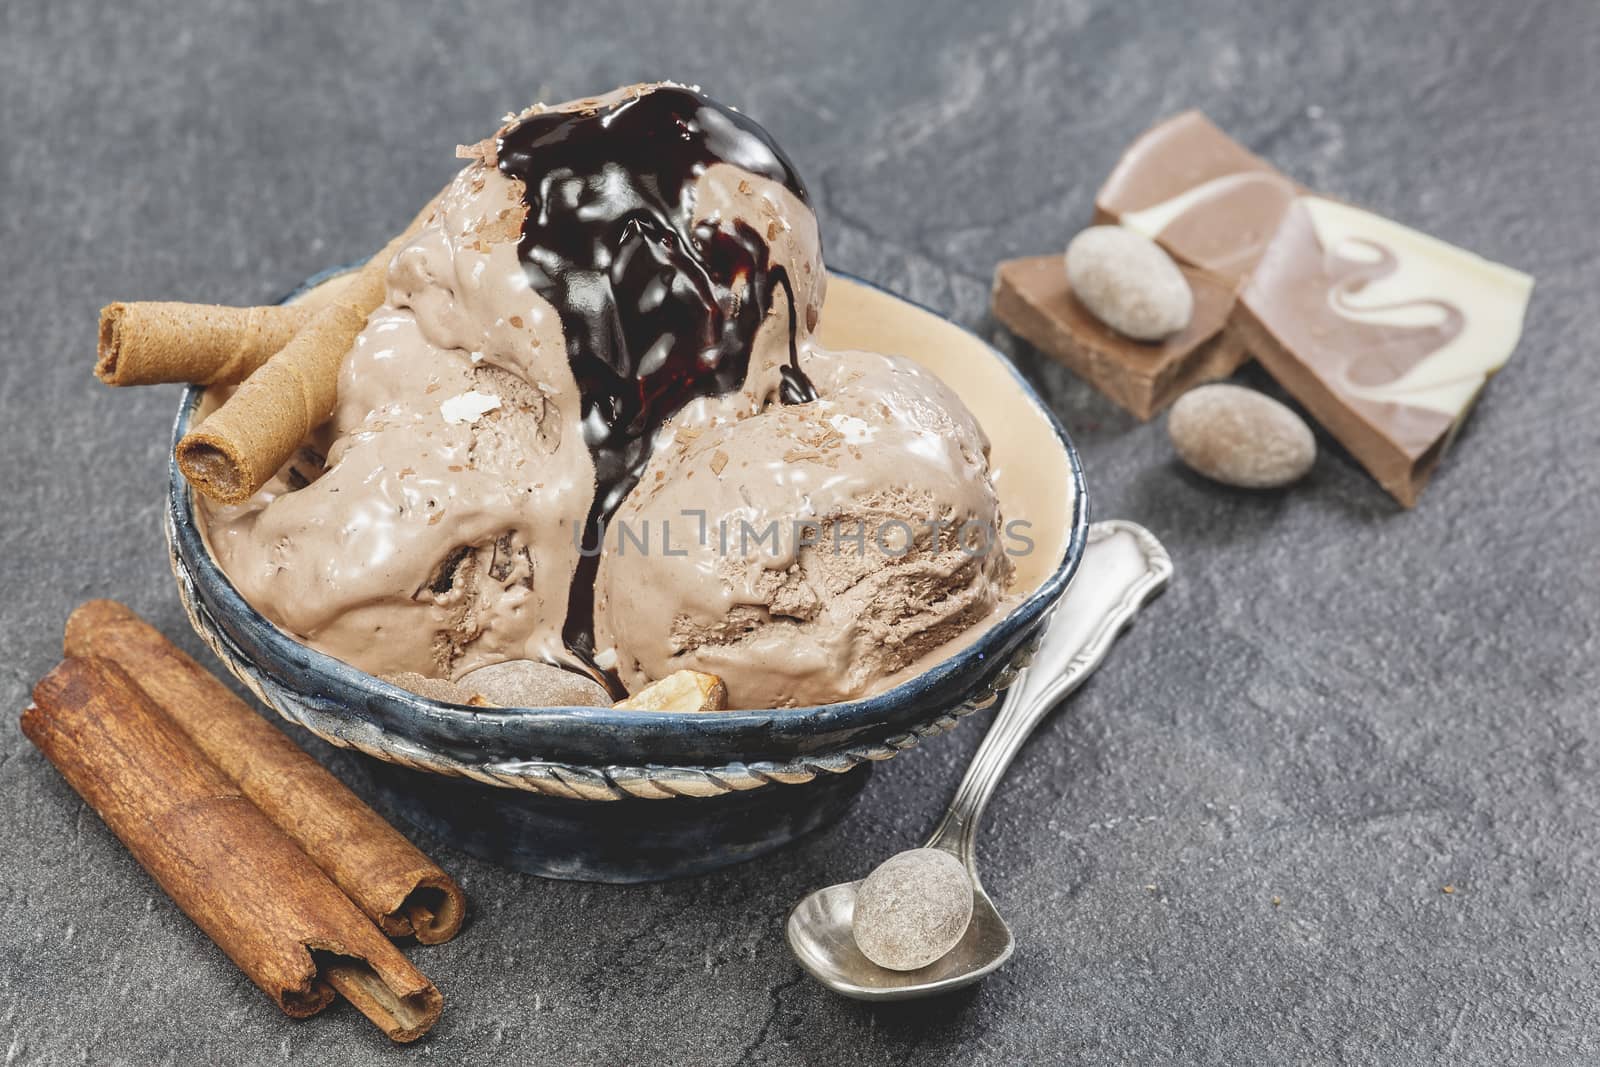 Ice cream with nuts and chocolate topping by Slast20